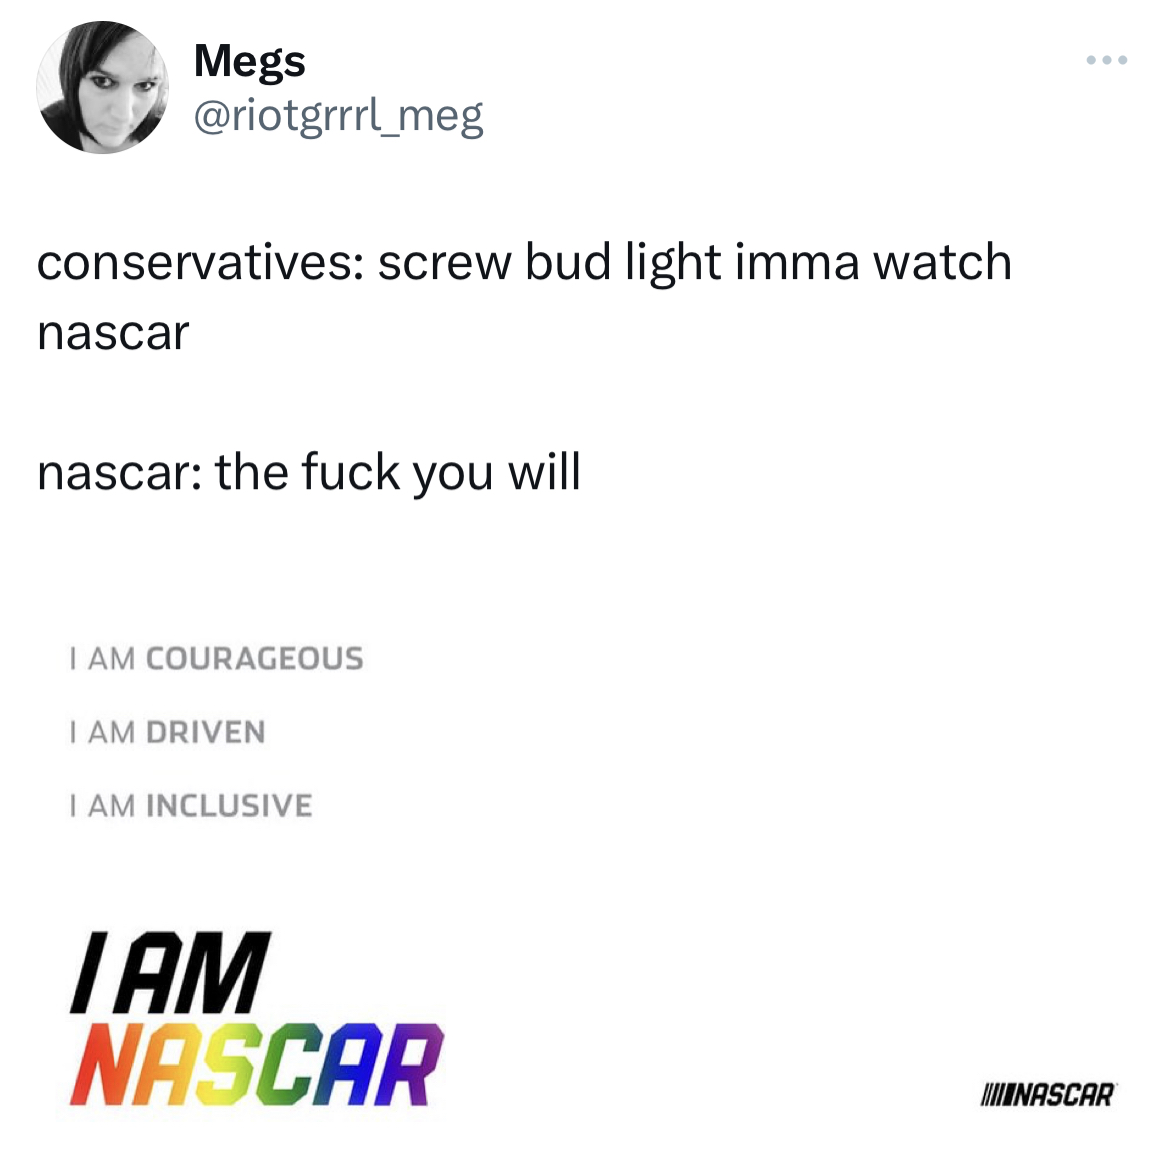 savage tweets - paper - Megs conservatives screw bud light imma watch nascar nascar the fuck you will I Am Courageous I Am Driven I Am Inclusive Iam Nascar Nascar